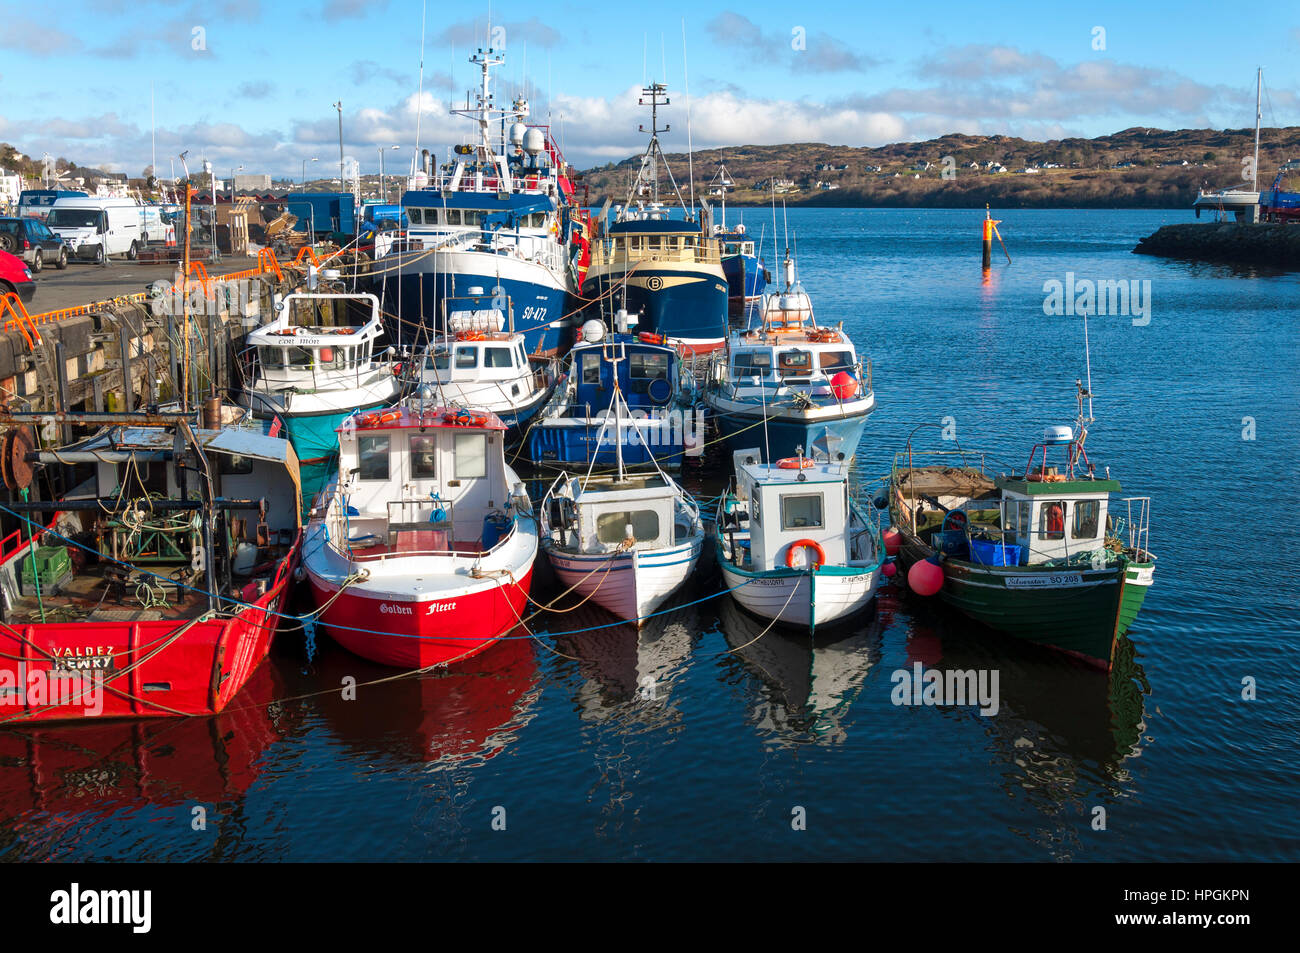 Killybegs fishing port harbour and boats, County Donegal, Ireland Stock Photo